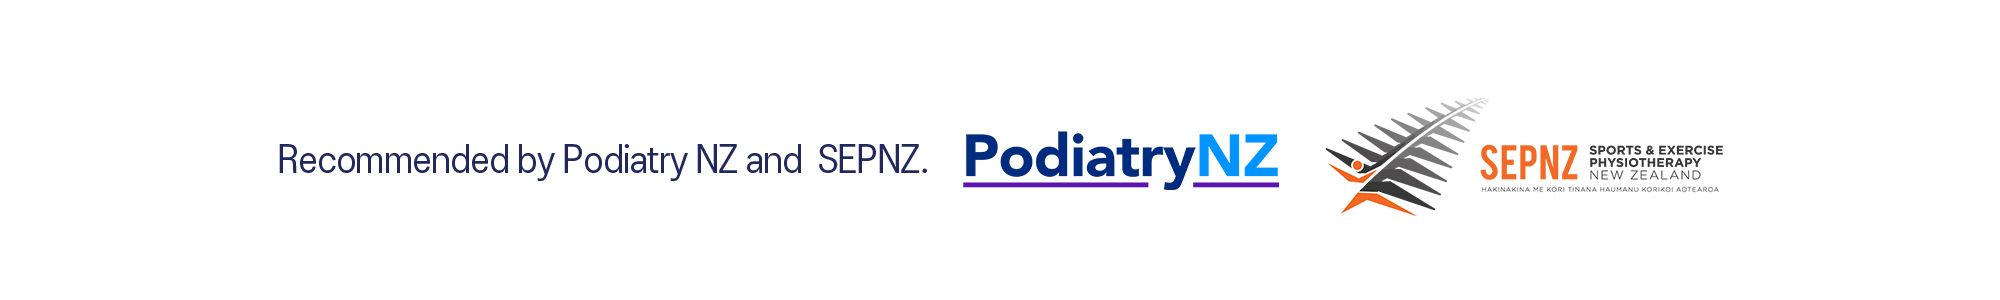 Recommended by Podiatry NZ Desktop